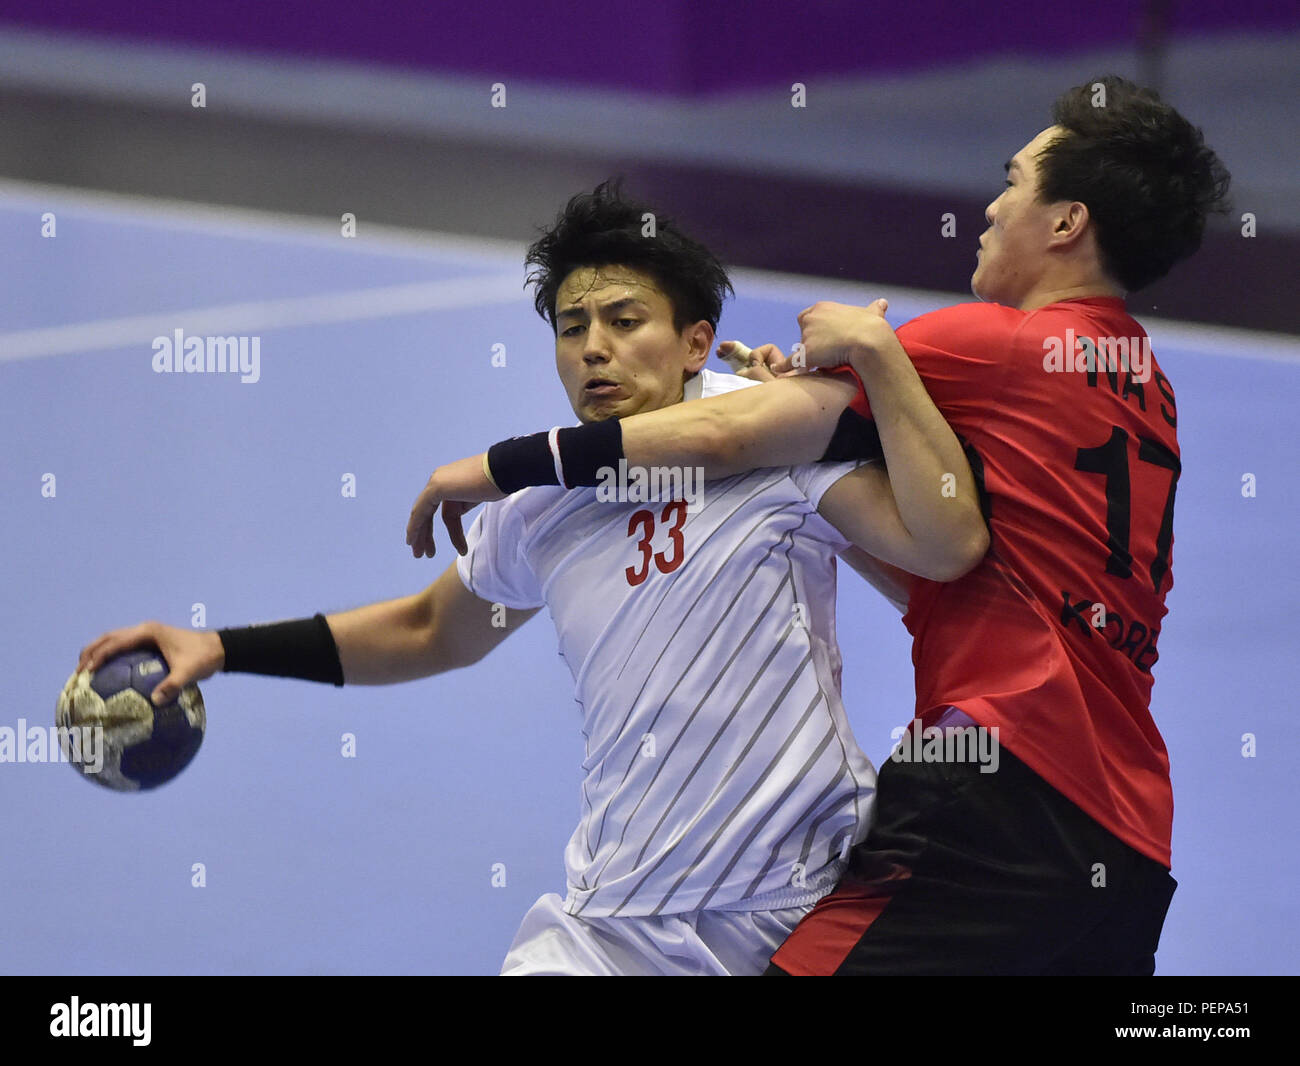 Jakarta. 17th Aug, 2018. Agarie Yuto (L) of Japan competes during the Men's Handball Preliminary Round Group B match between Japan and South Korea at the Asian Games 2018 in Jakarta, Indonesia on Aug. 17, 2018. The match ended with a 26-26 draw. Credit: Li He/Xinhua/Alamy Live News Stock Photo